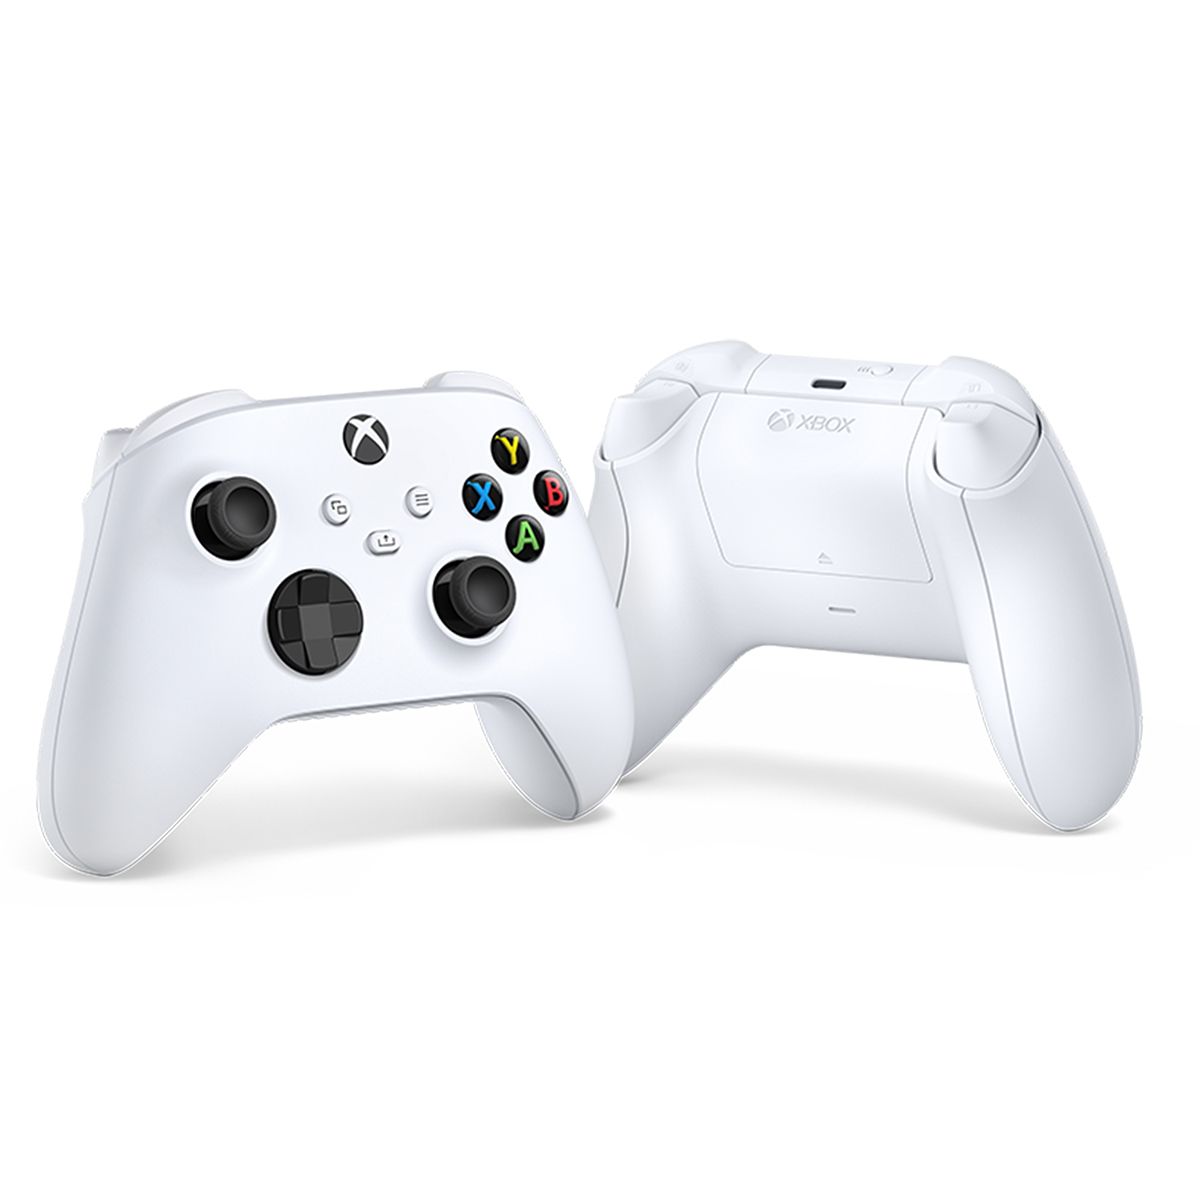 Xbox Series S + Xbox Wireless Controller Robot White + 3 Month Game Pass - image 2 of 18